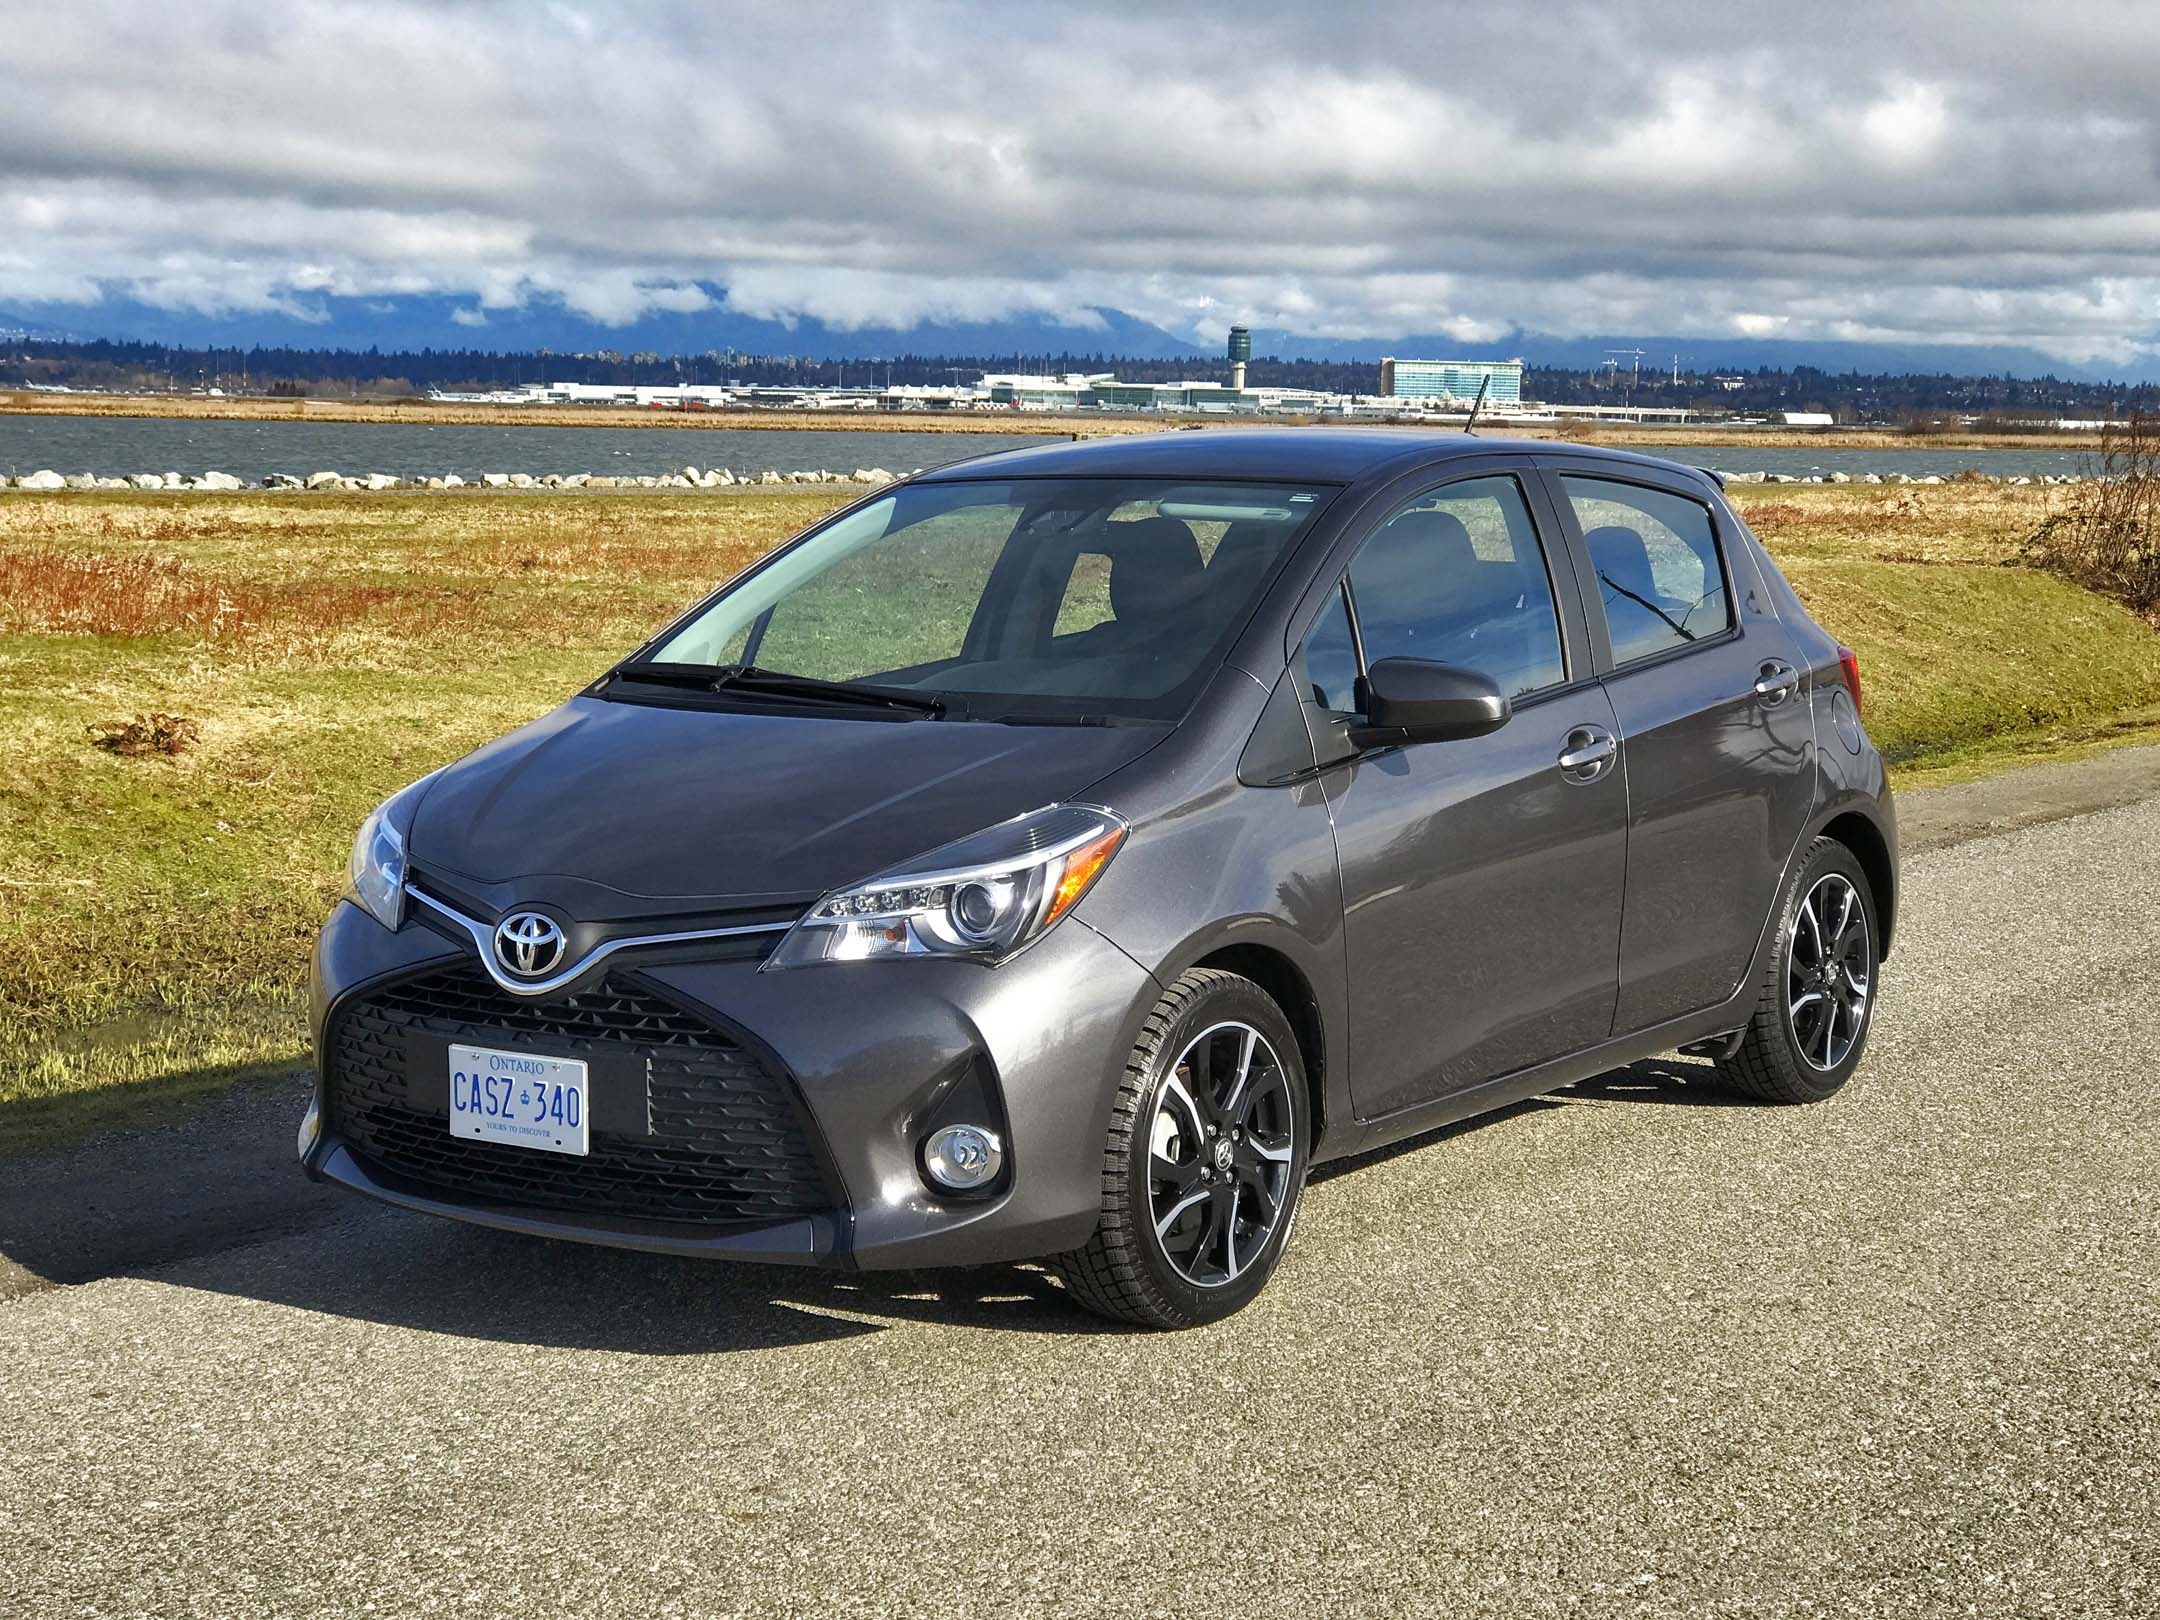 Toyota Yaris, Test drive review, Sporty and practical, Smooth driving experience, 2160x1620 HD Desktop